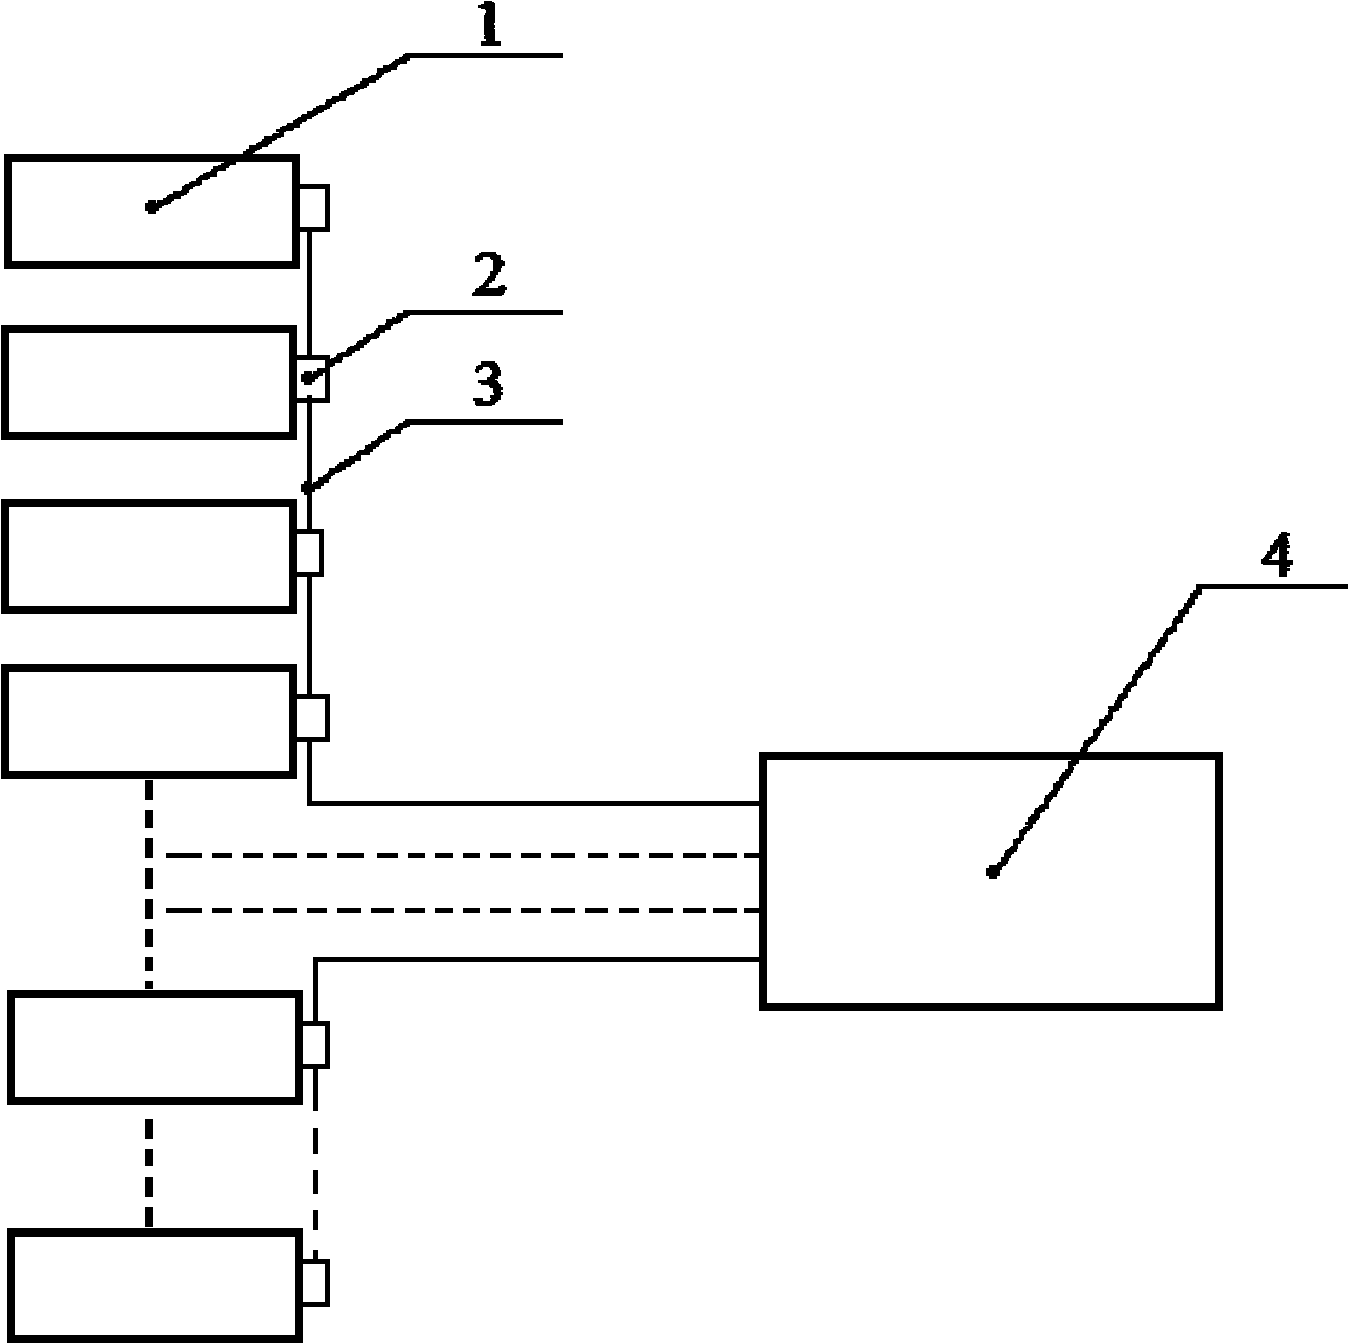 Supporting and hanging frame stress monitoring system for main steam line of thermal power generating unit